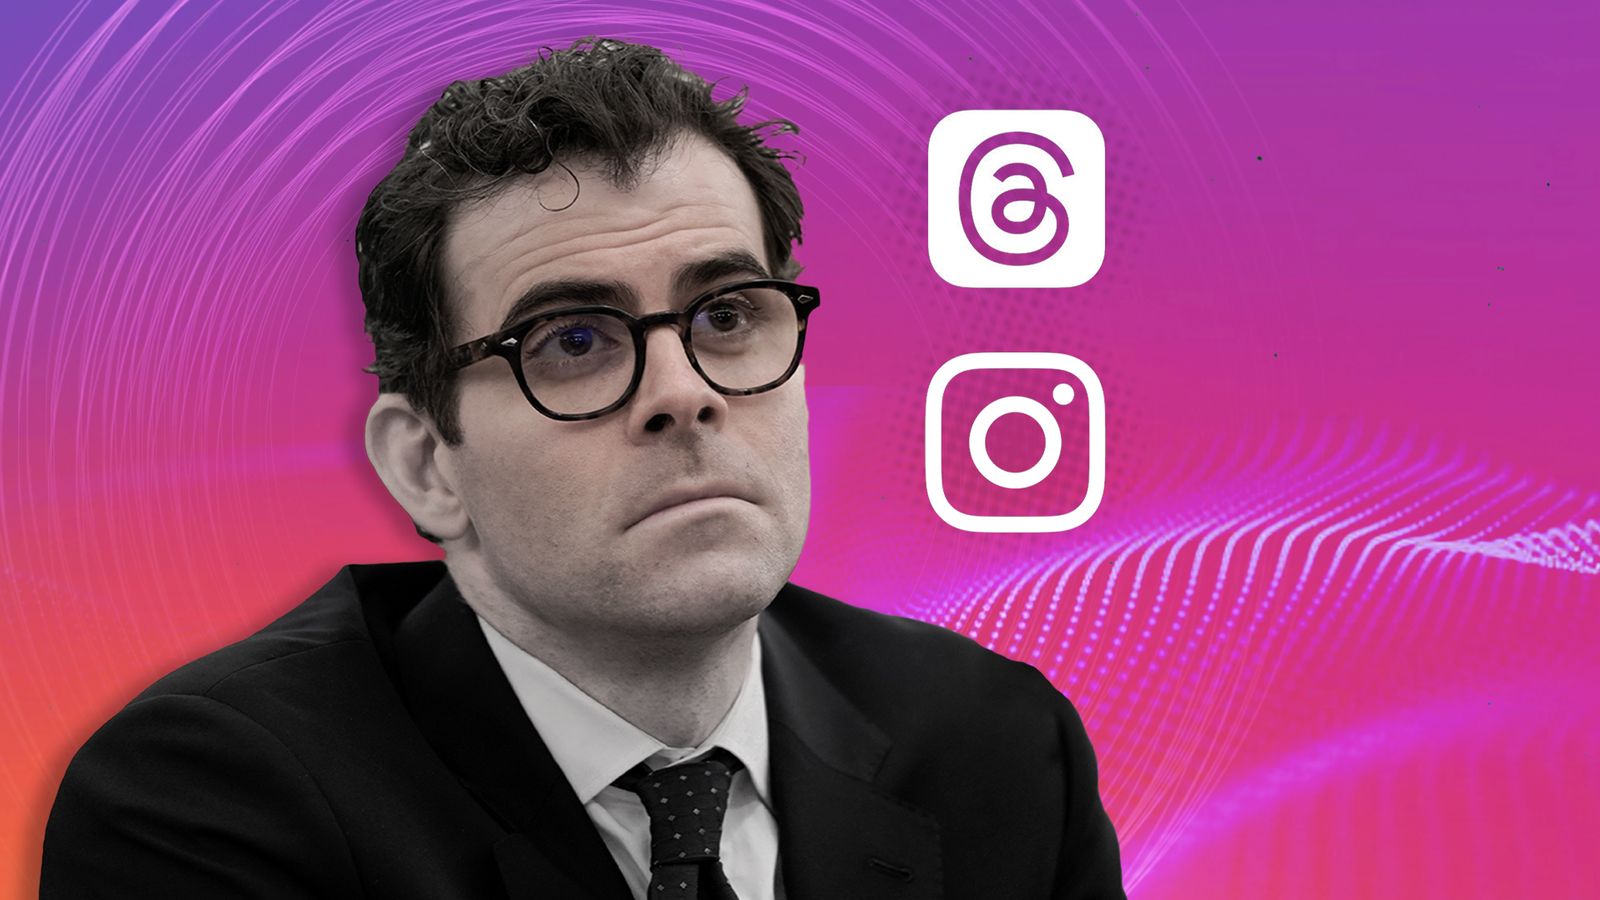 Who Is Adam Mosseri The Instagram Boss Now Spearheading Fast Growing Threads App Science